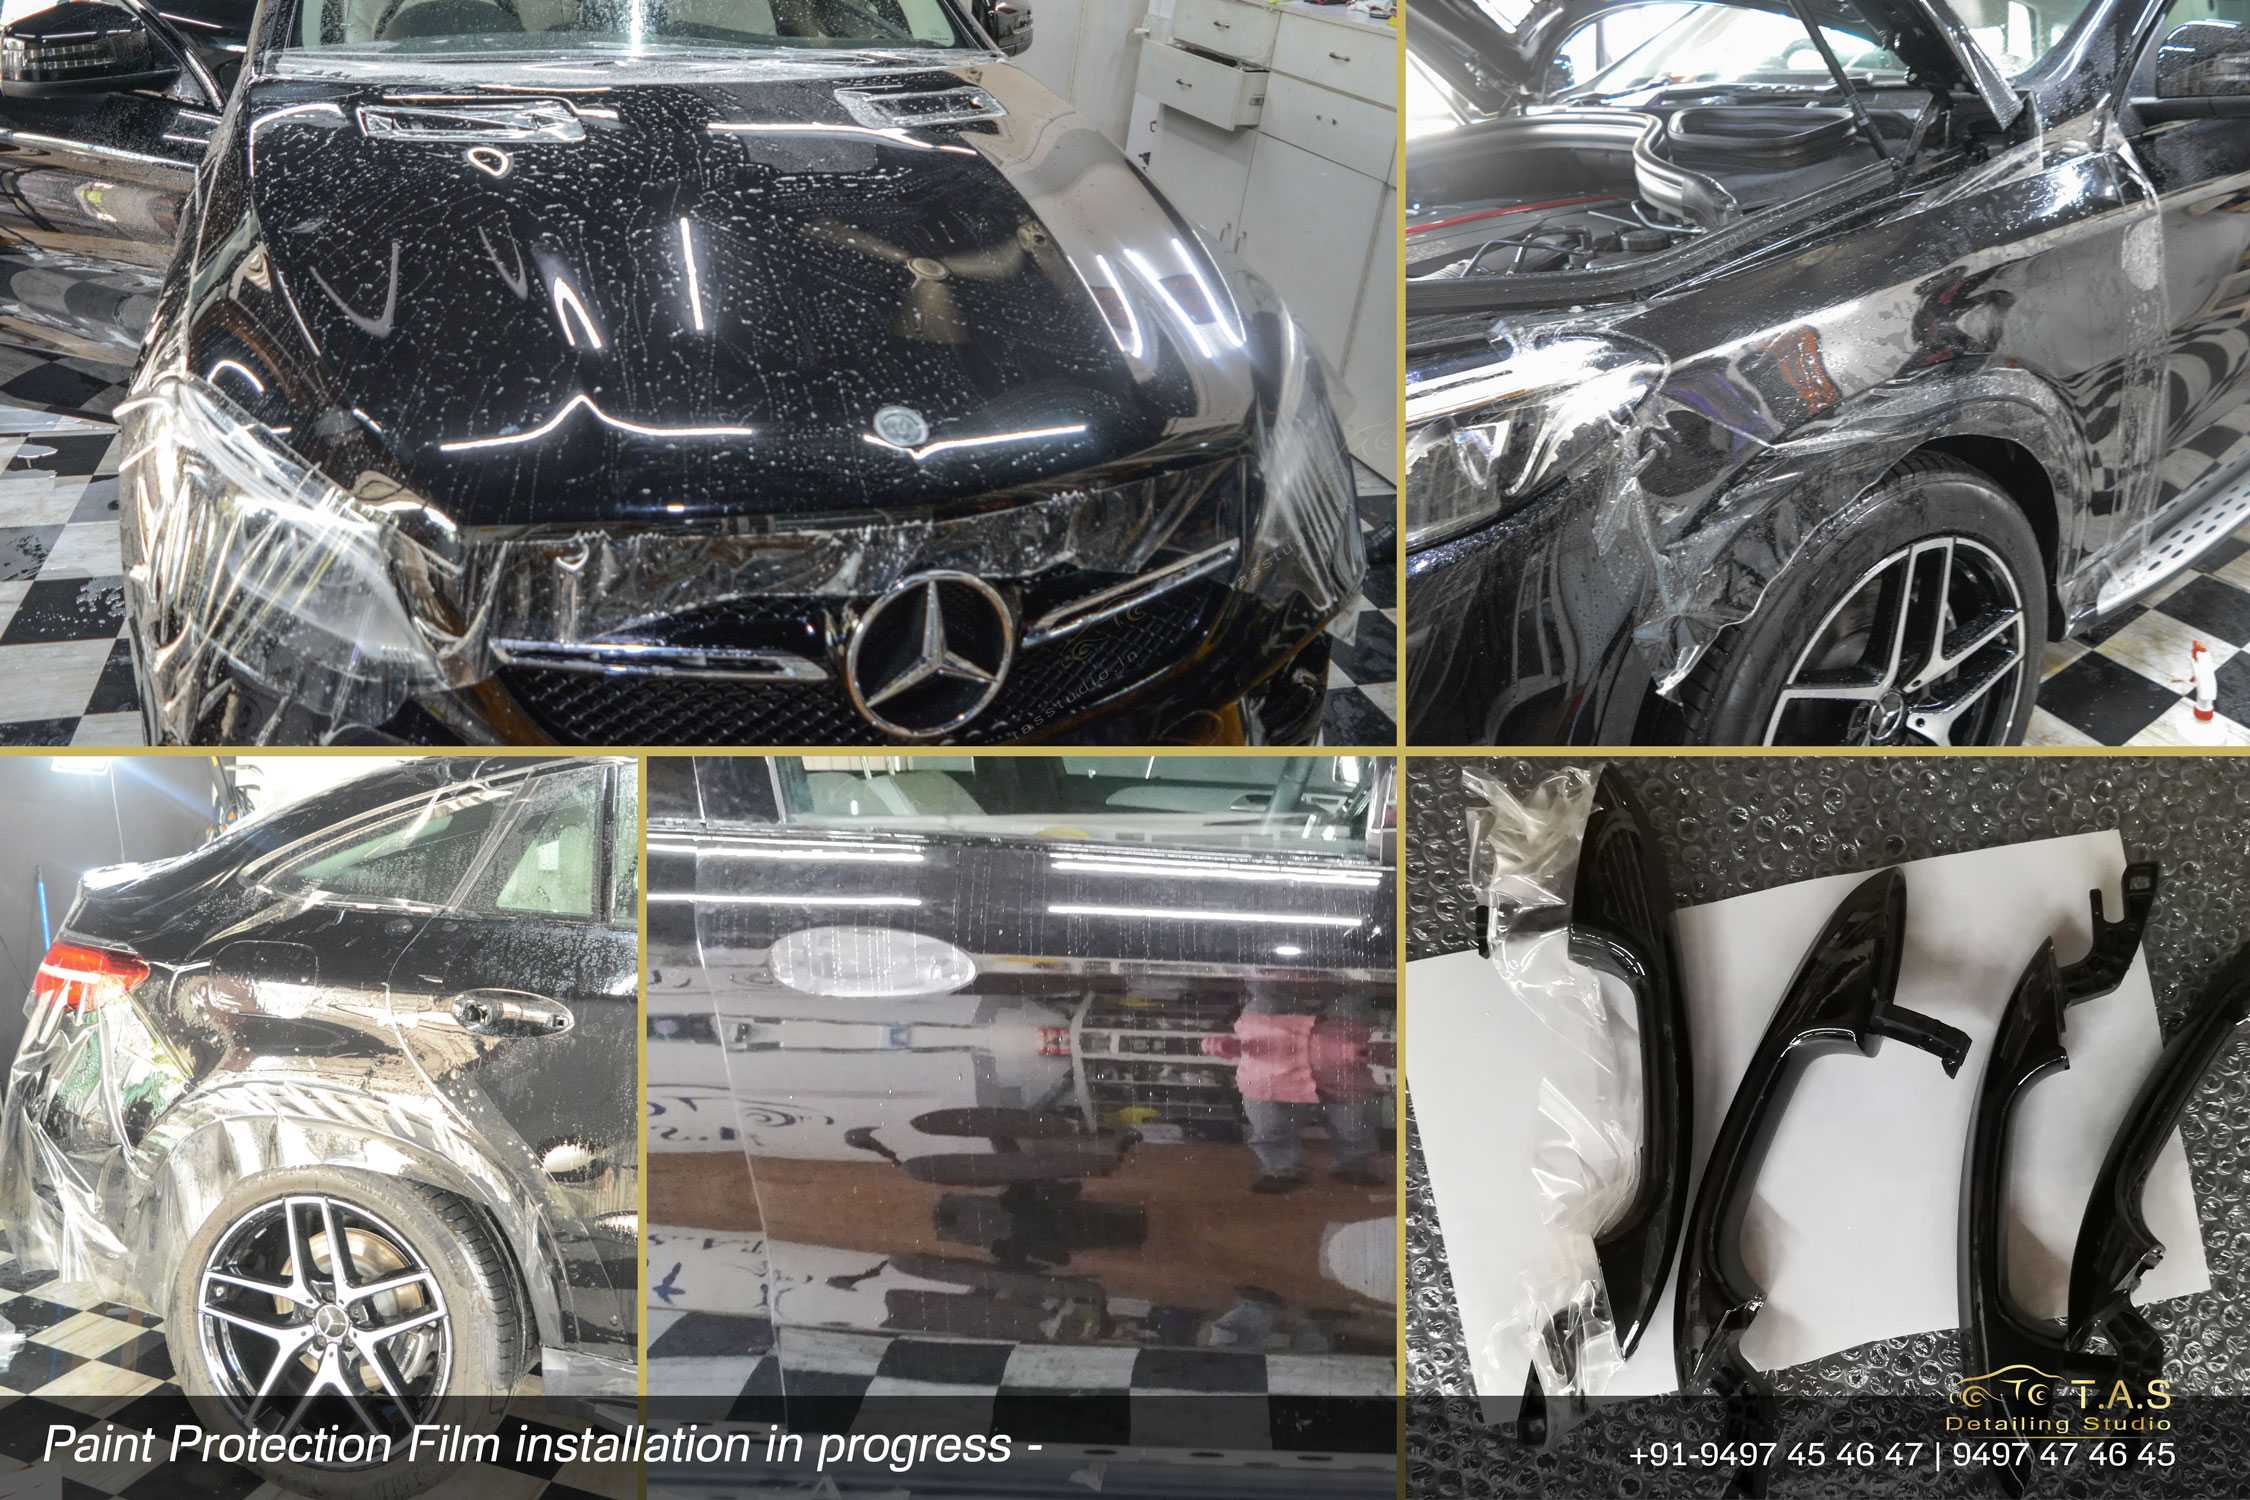 Benz GLE PPF, Completed at TAS, Travancore Auto Spa, Detailing Studio